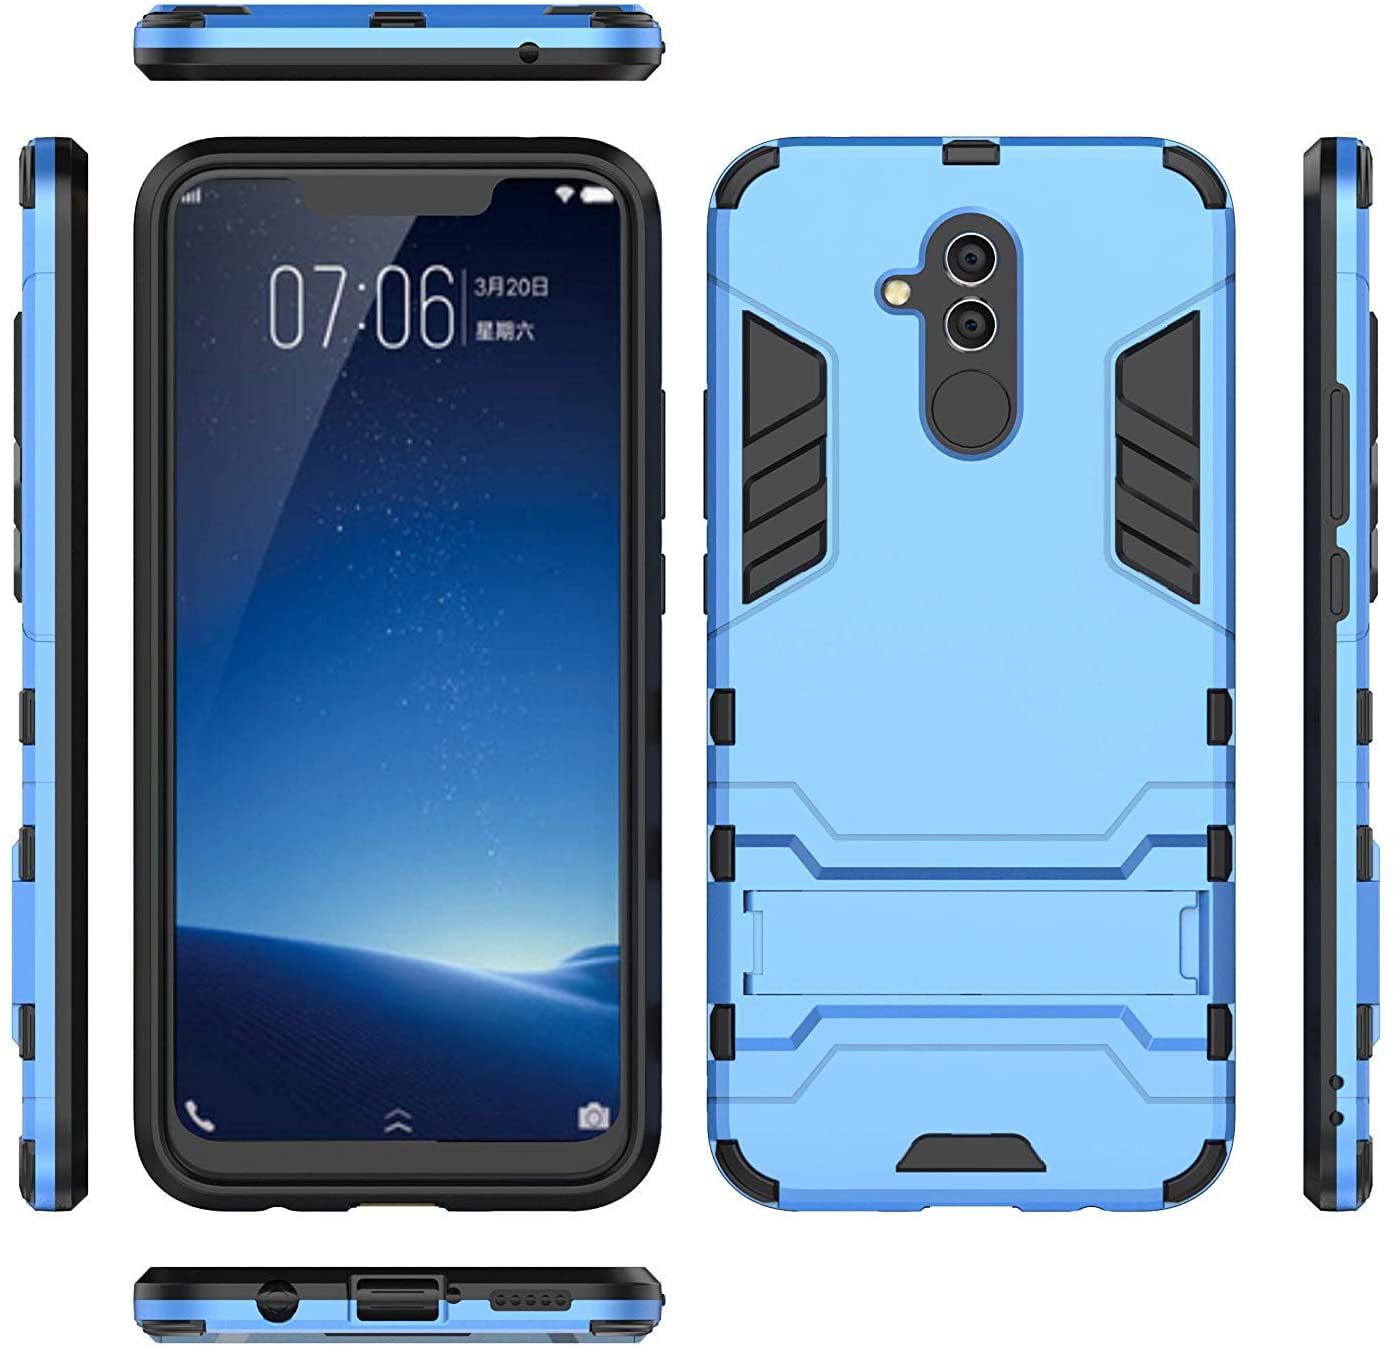 2 in 1 Shockproof with Kickstand Feature Hybrid Dual Layer Armor Defender Protective Cover 7.2 inch Red Case for Huawei Mate 20X